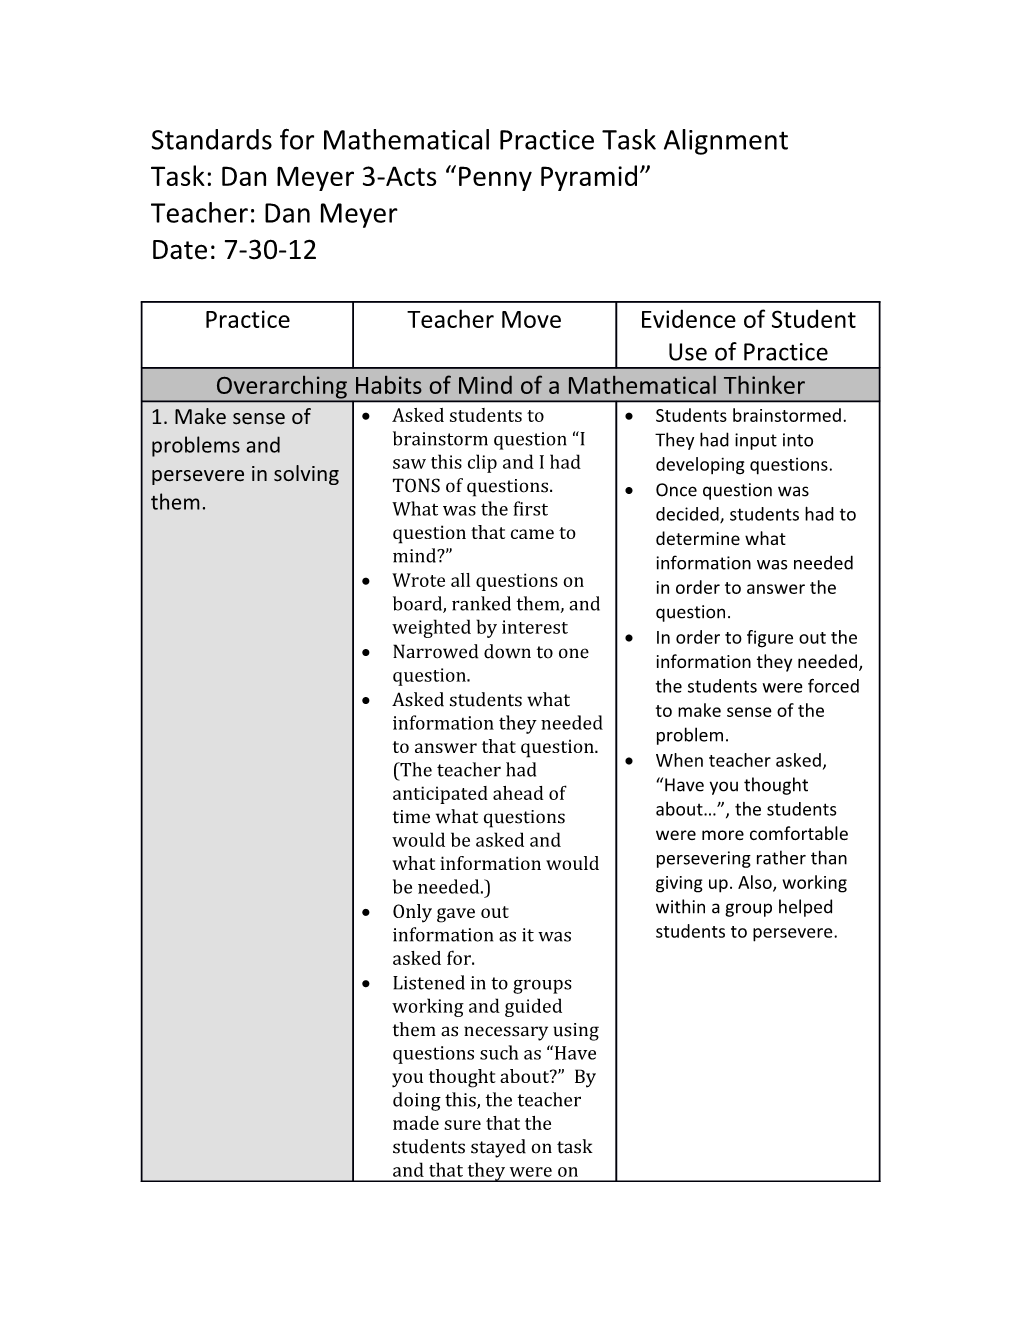 Standards for Mathematical Practice Task Alignment